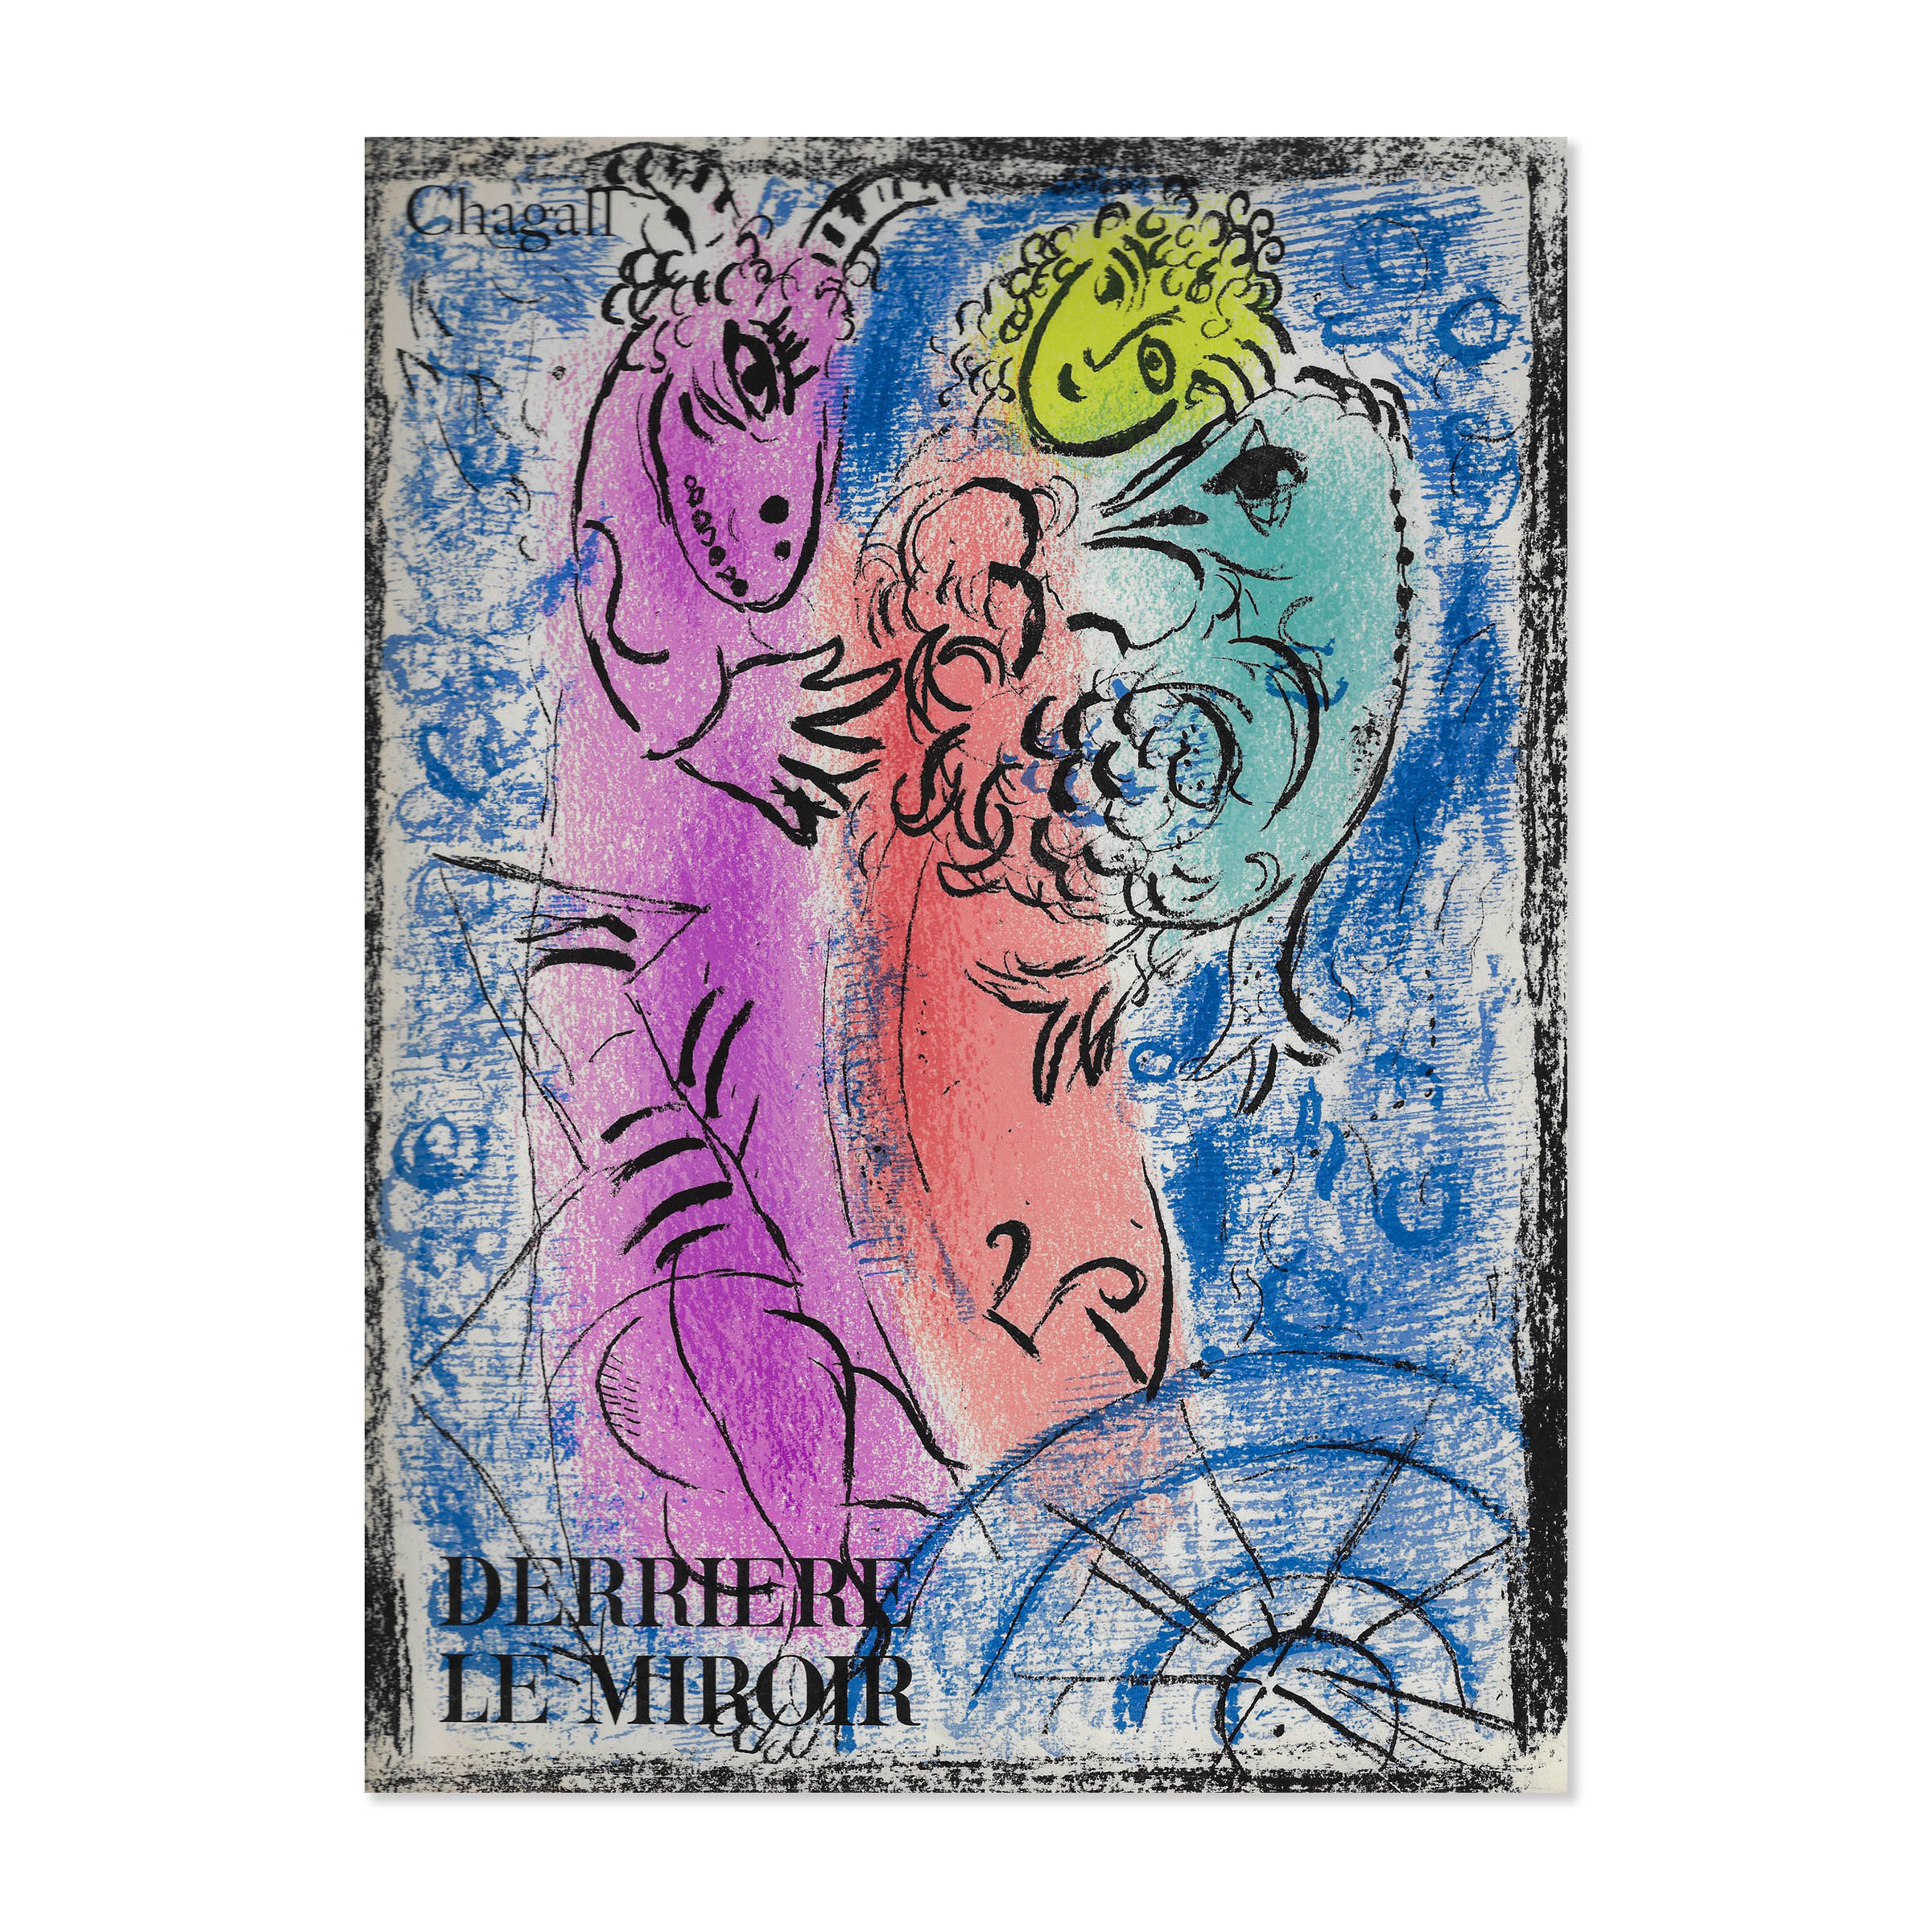 Chagall. DLM. n°132. Cover view